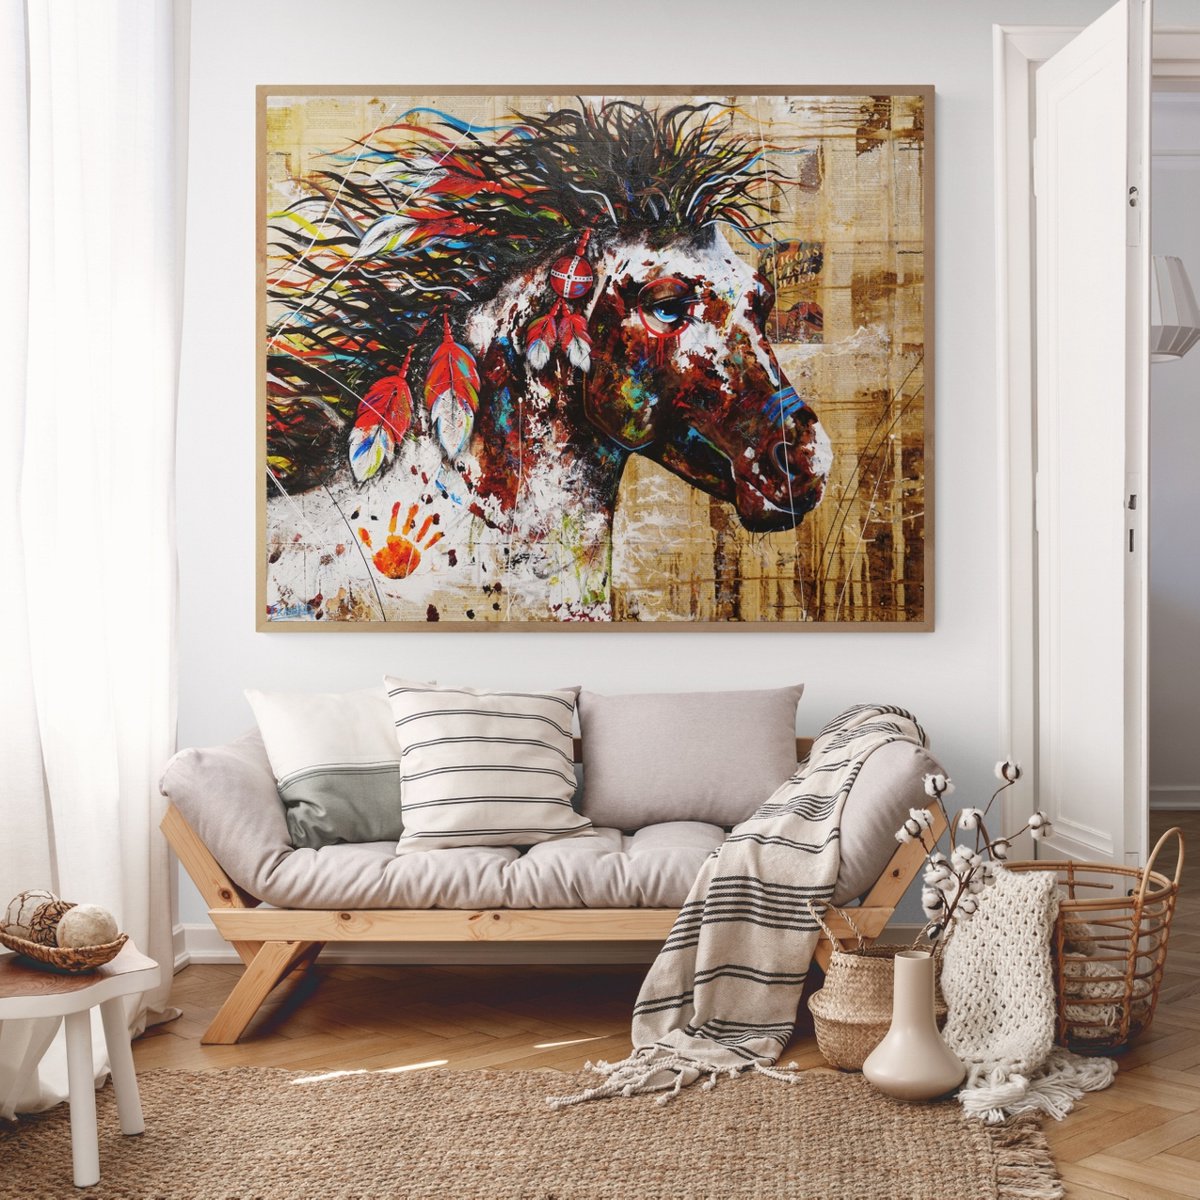 Wild Ahiga 120cm x 150cm Indian Appaloosa War Horse Book Page Abstract Realism Art by Franko